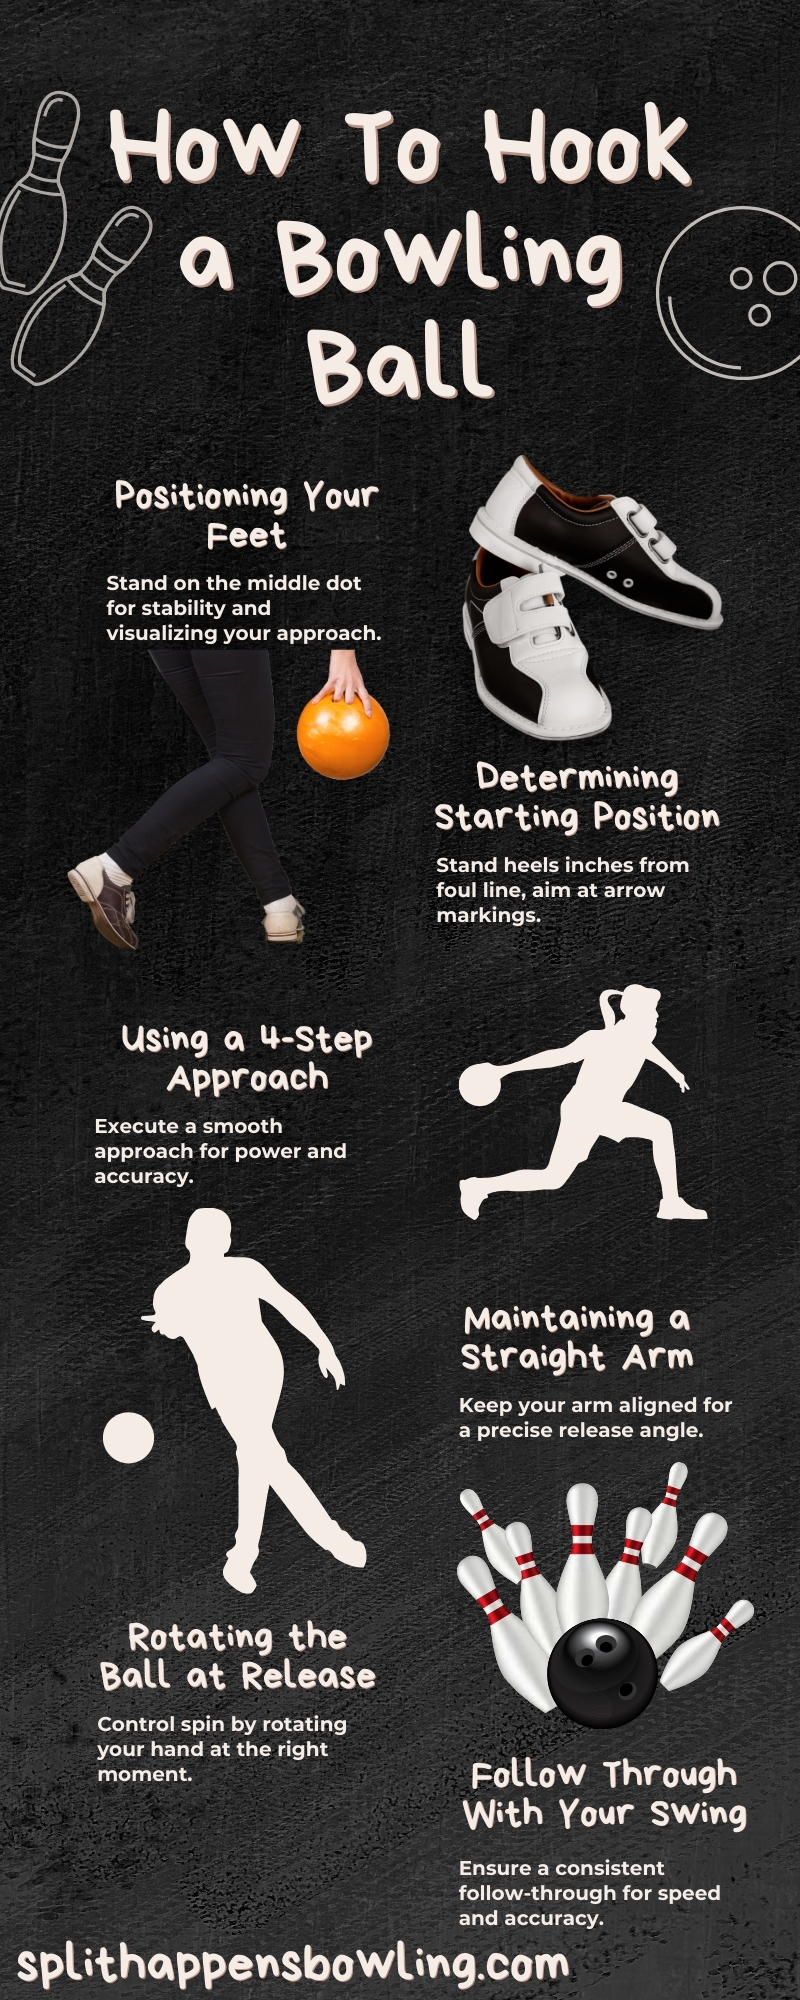 How To Hook a Bowling Ball Infographic